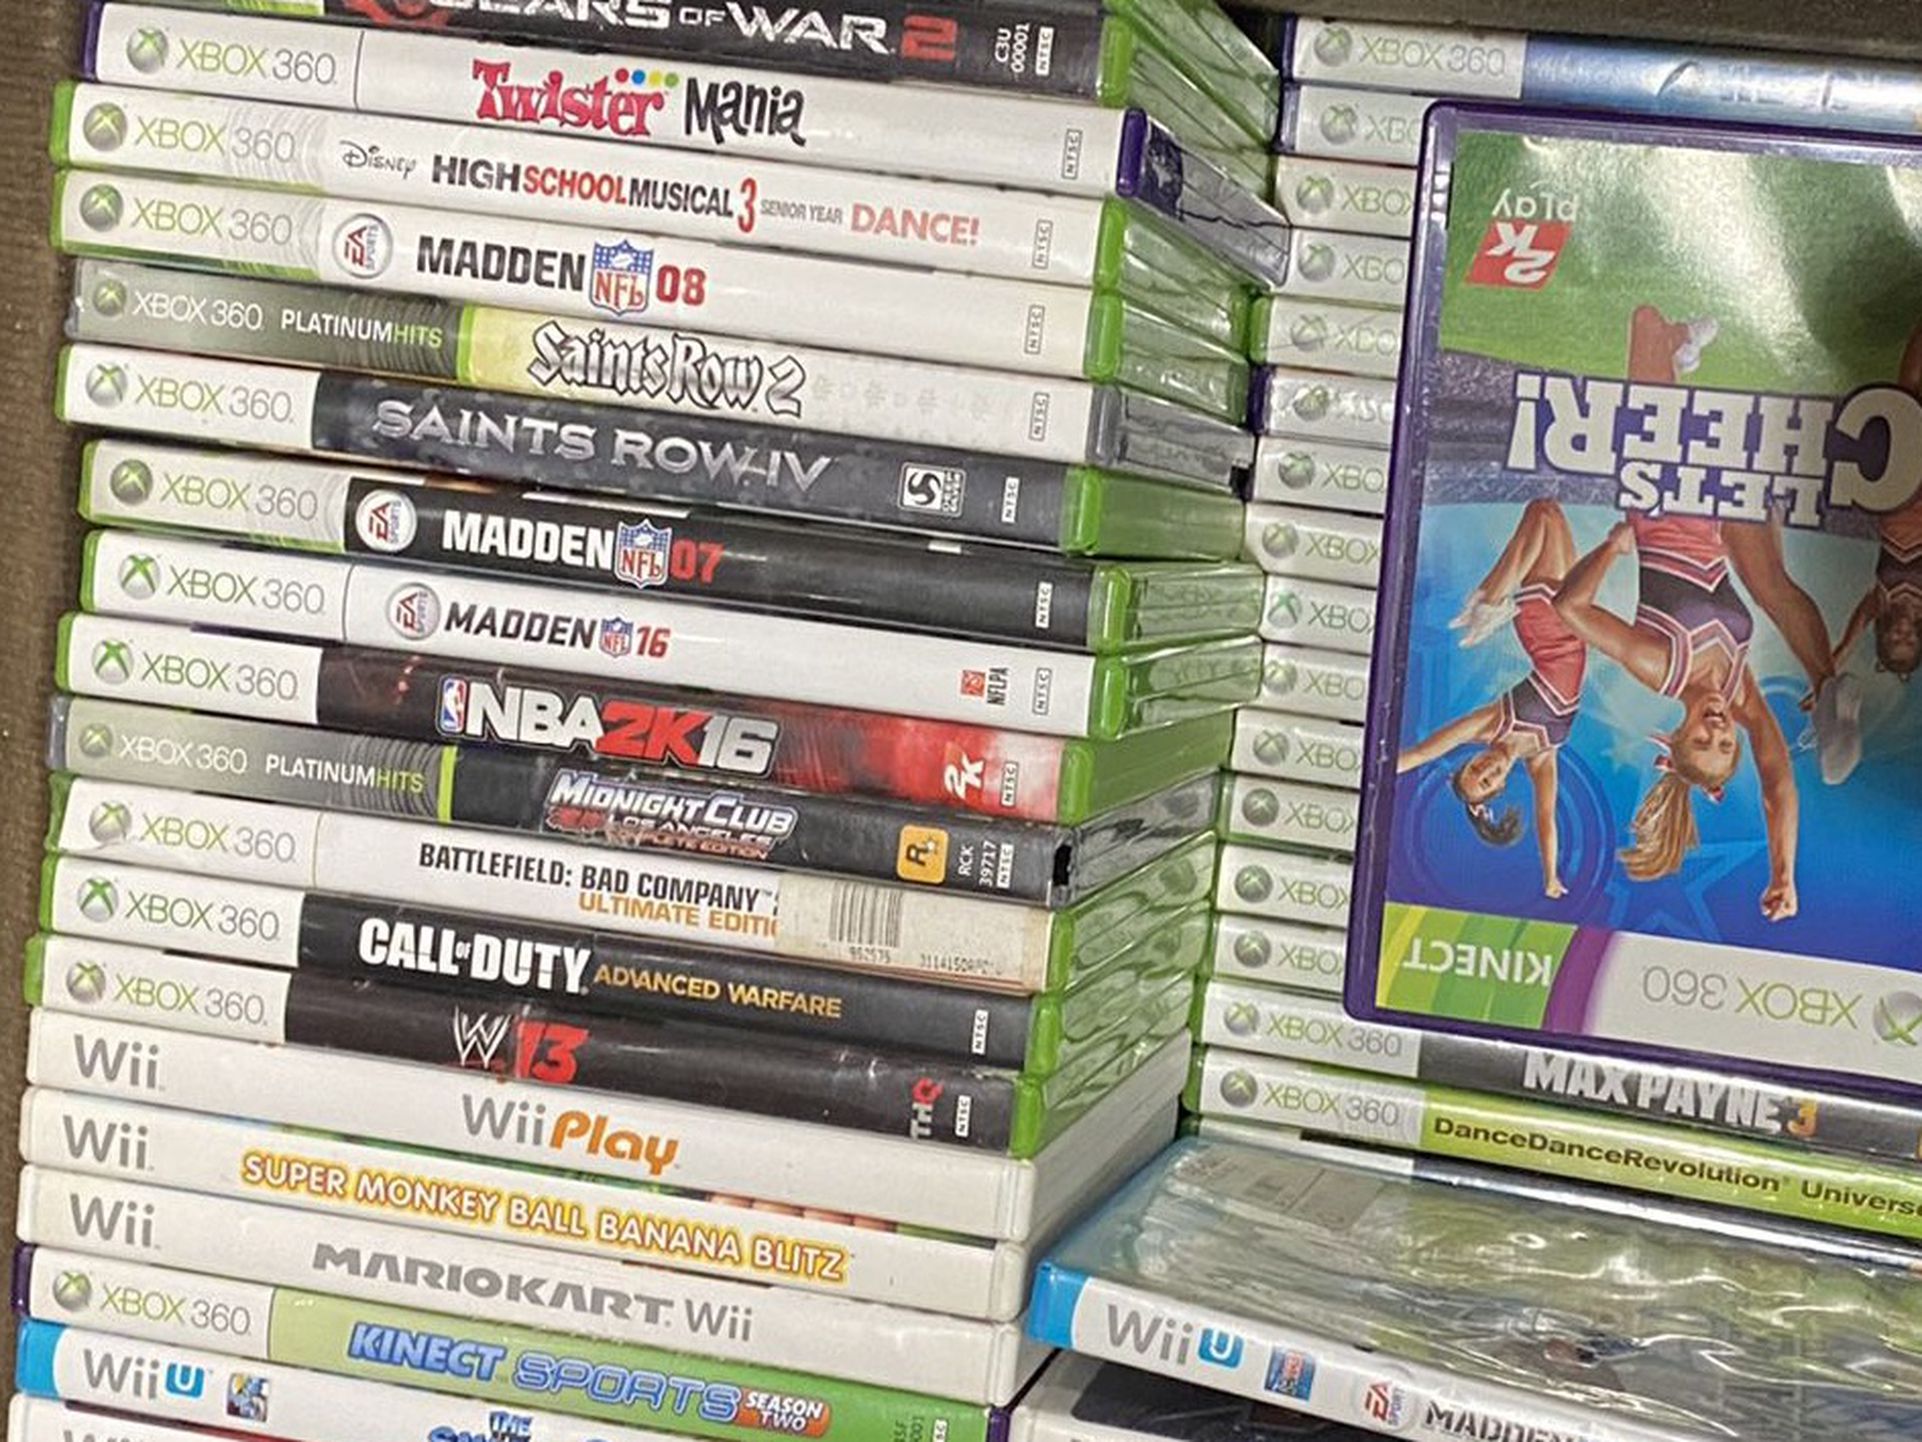 XBOX 360, WII and WII U Games For Sale!!!!